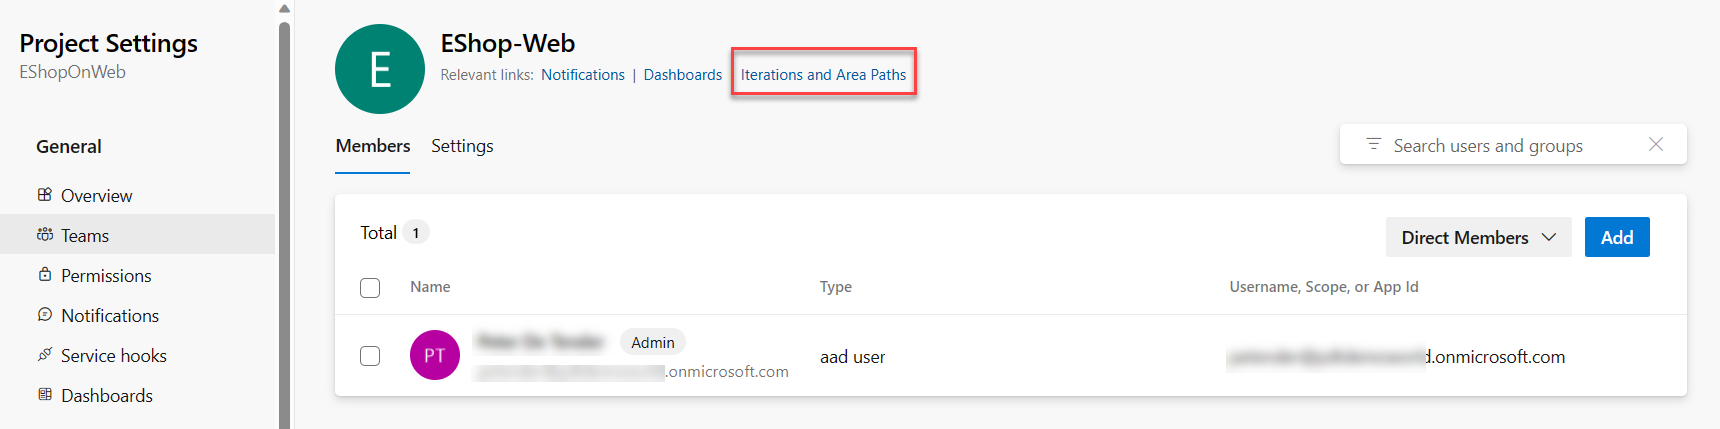 In project settings window, "Teams" tab, "EShop-WEB" team, click on "Iterations and Area Paths"